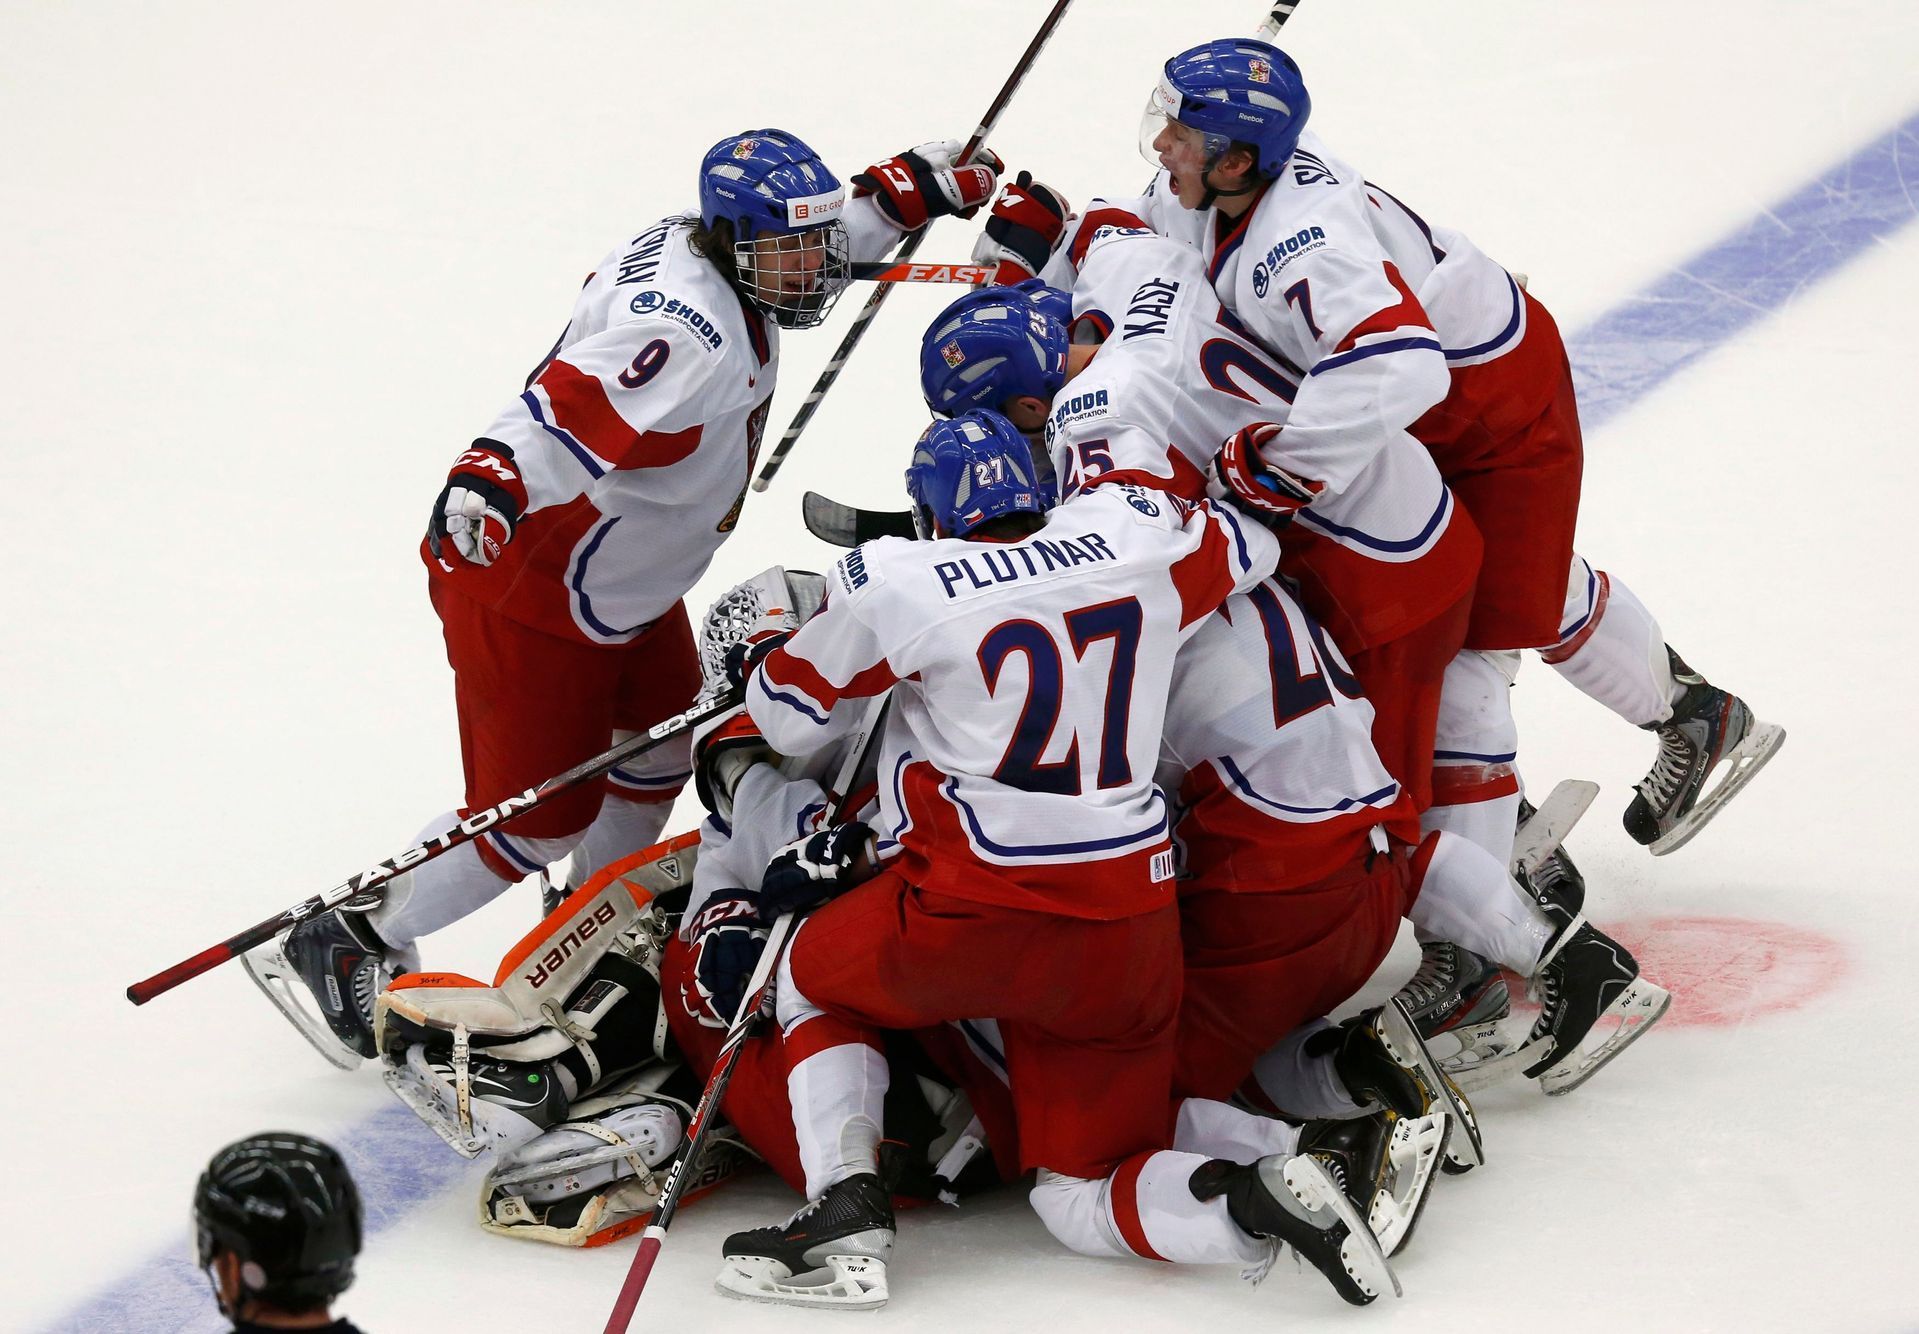 Members of the Czech Republic's team celebrate after defeating Canada in a shootout of their IIHF World Junior Championship ice hockey game in Malmo